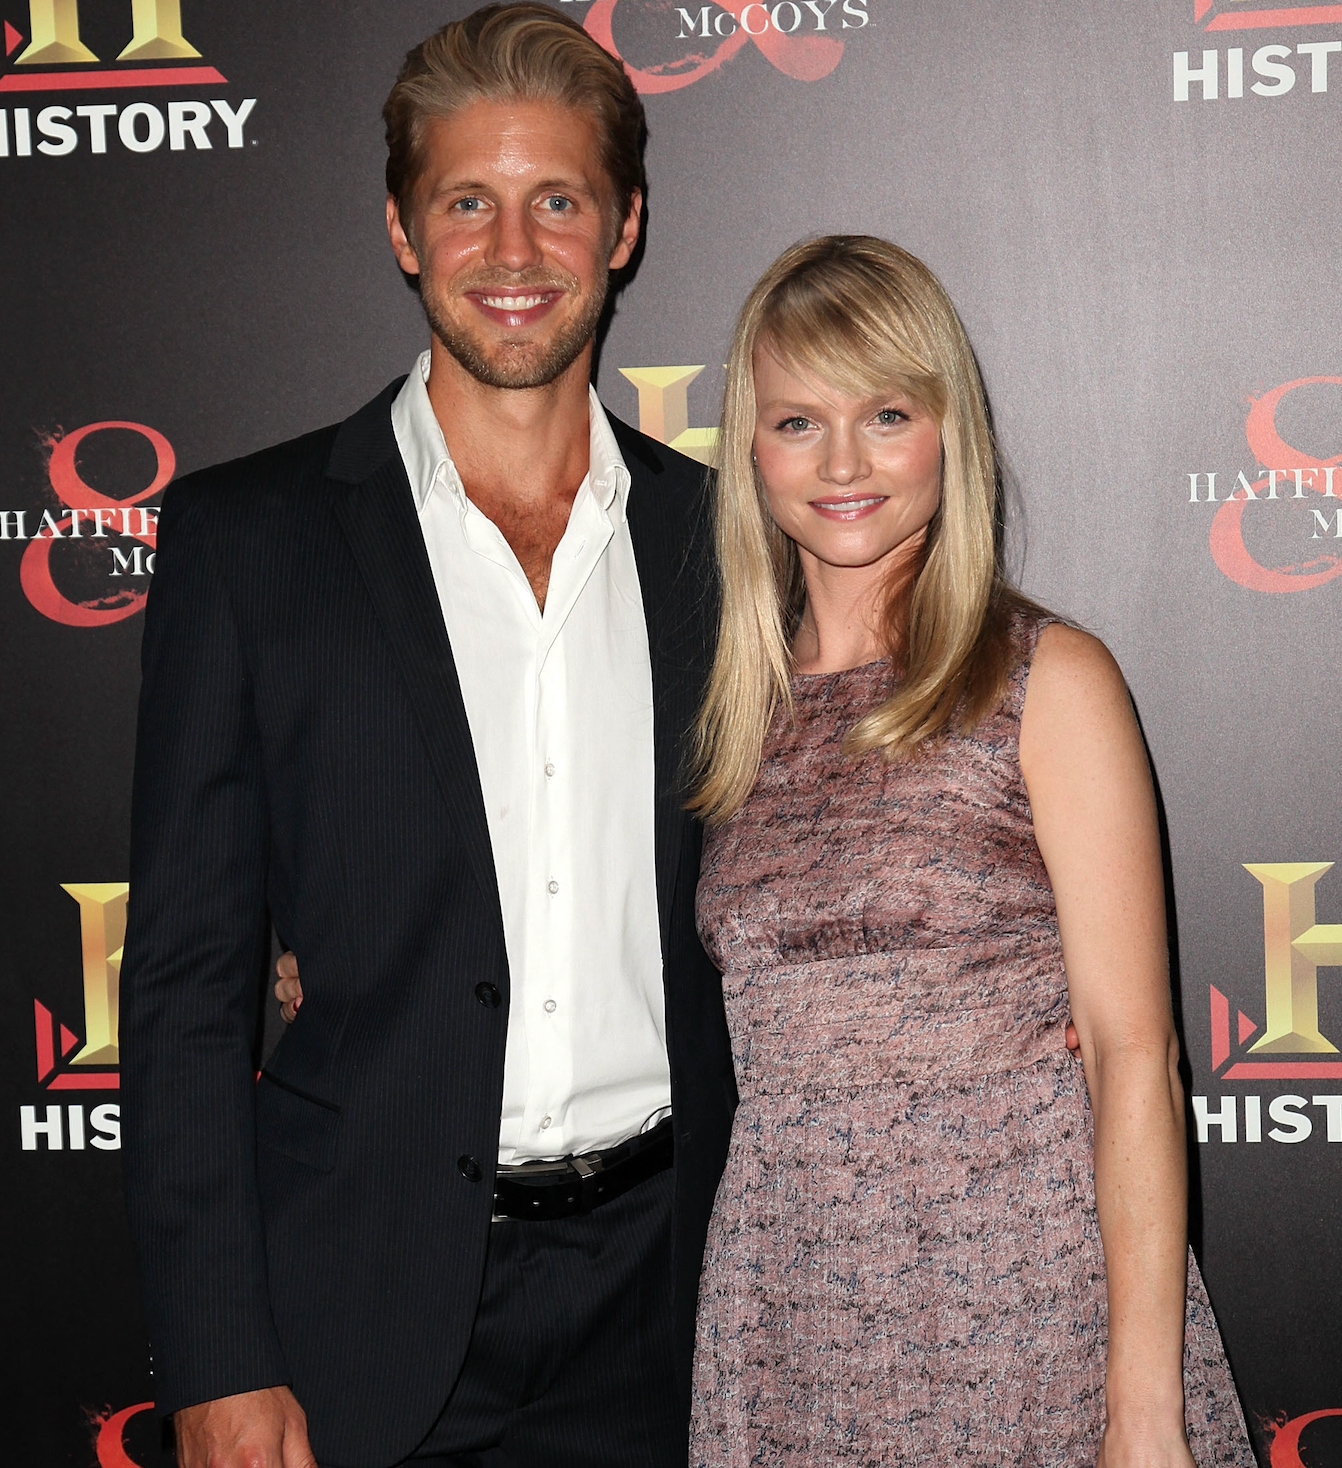 'True Blood' Actress Lindsay Pulsipher Files For Divorce, Says She's 'Unemployed'